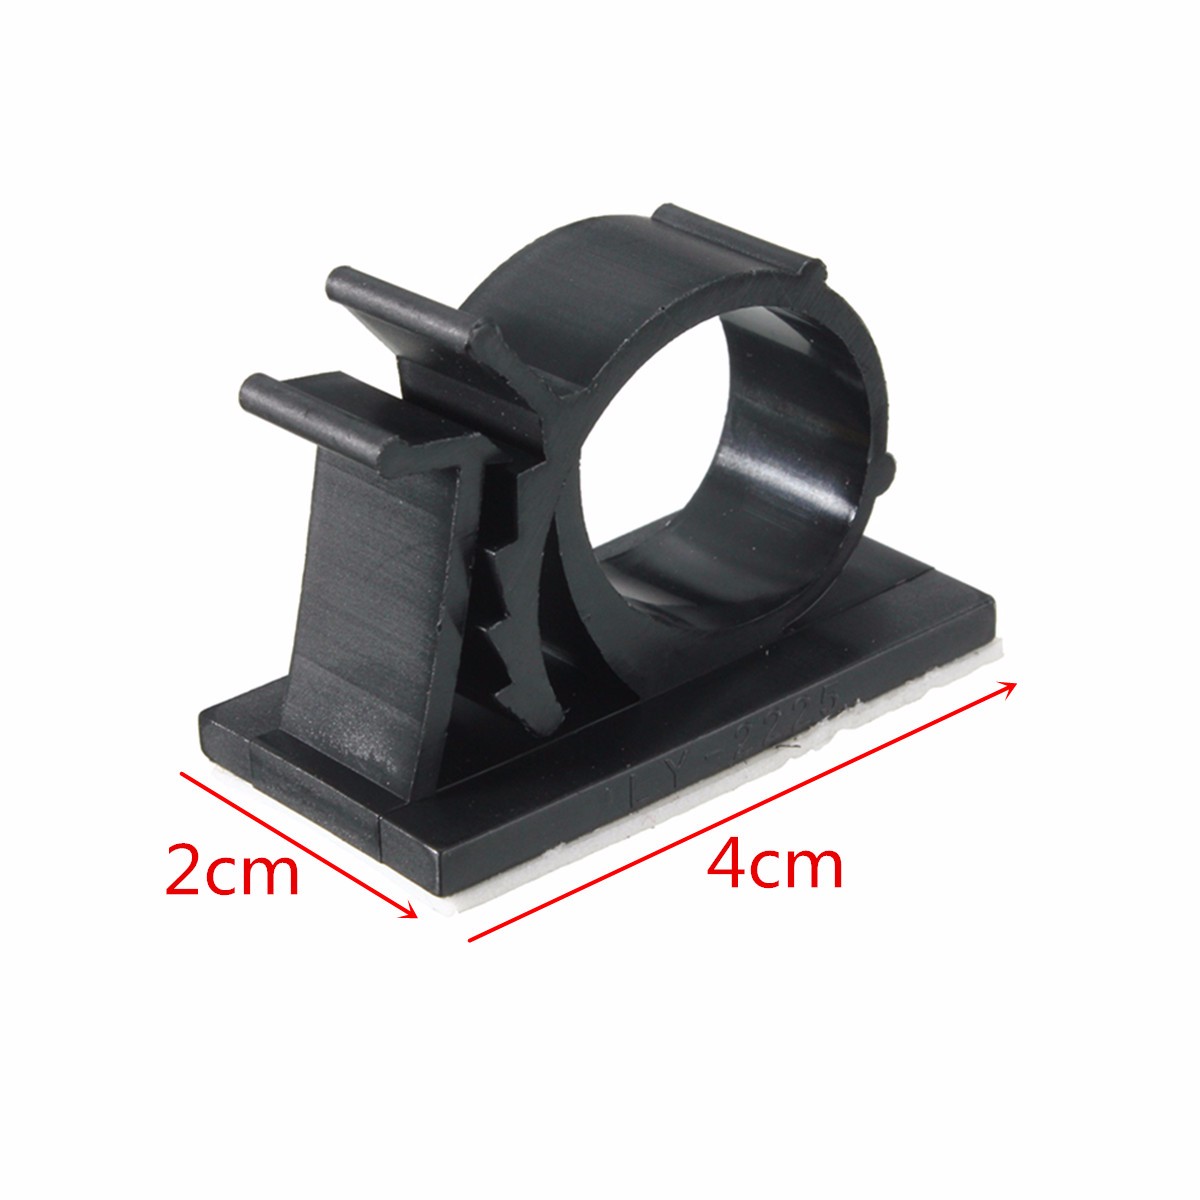 10PCS-Black-Adhesive-Cord-Wire-Cable-Clips-Ties-Organizers-Wall-Mounted-Clamps-1038809